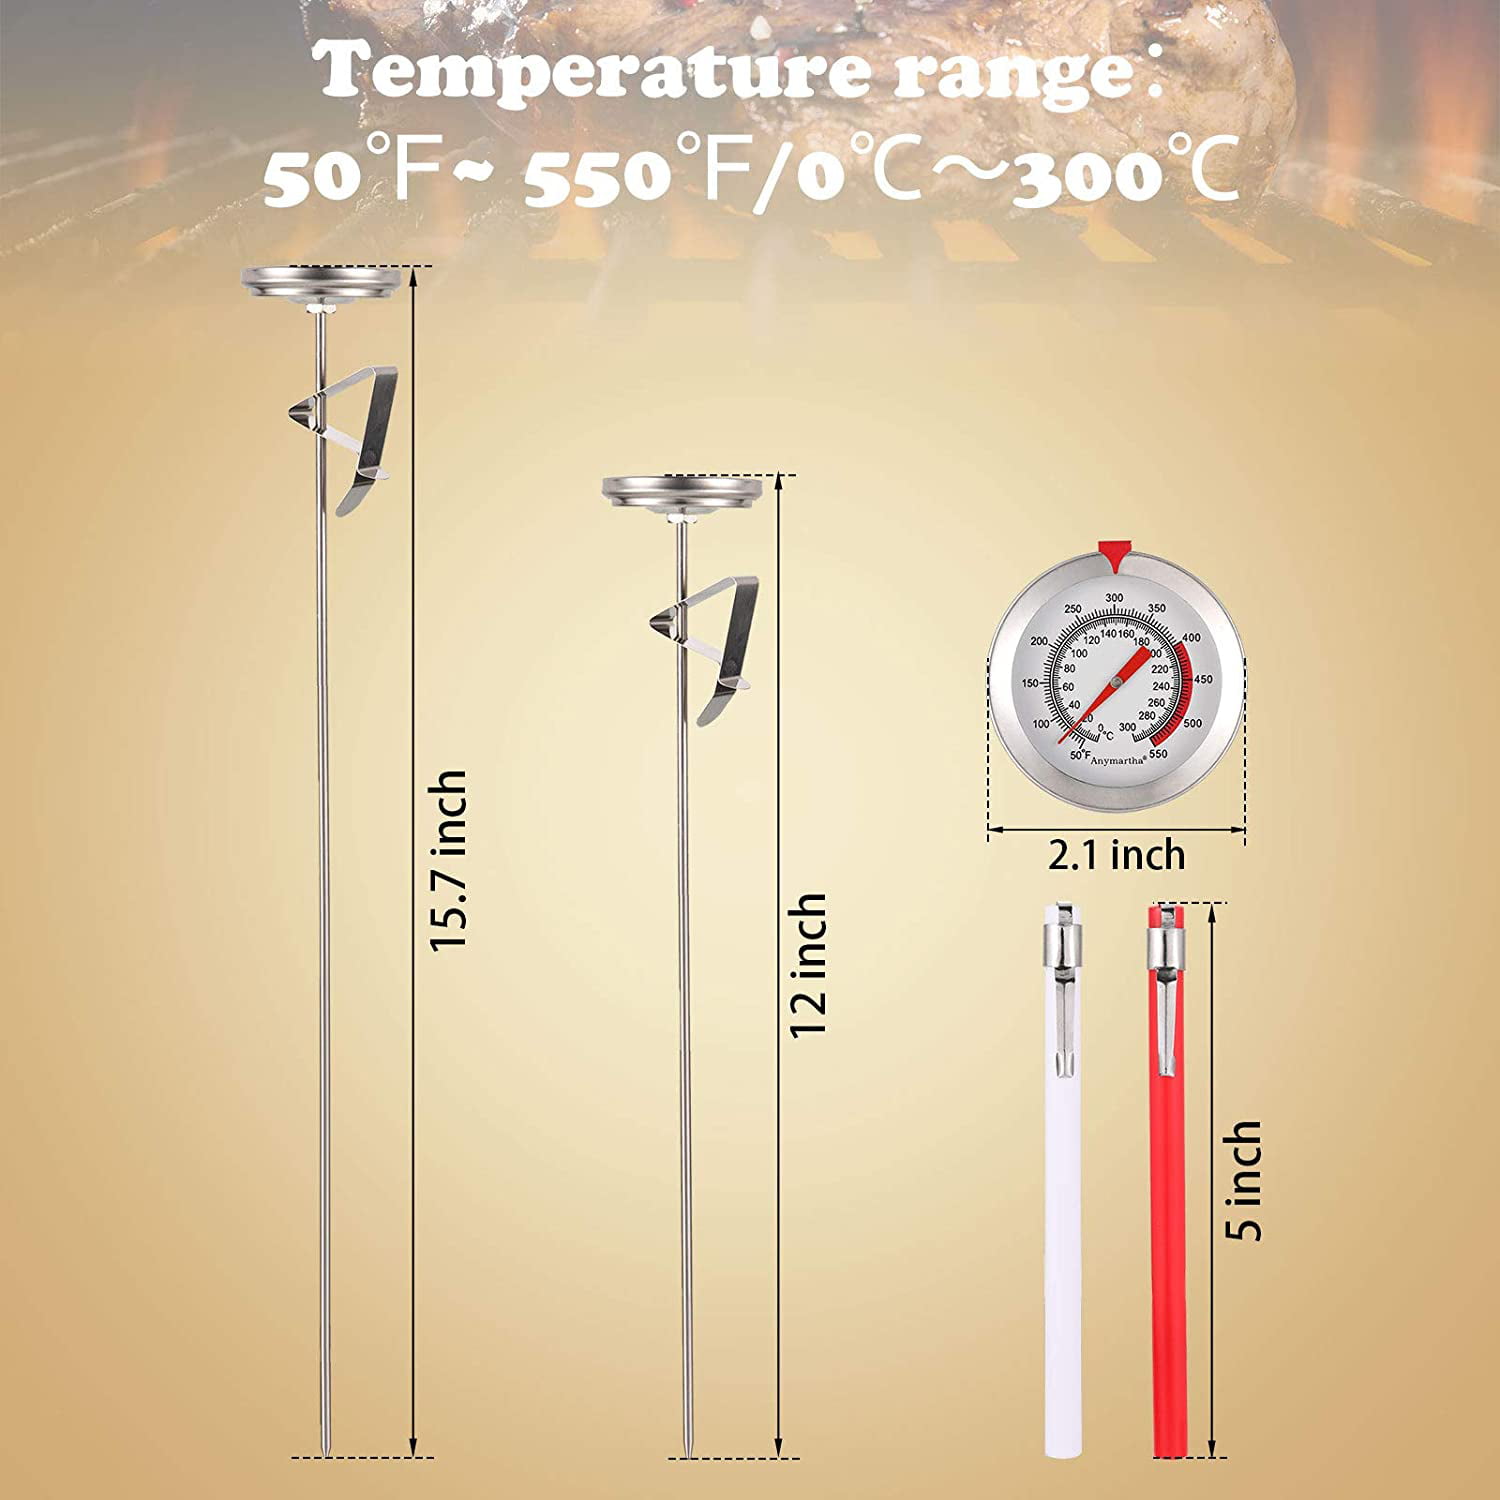 Beef Lamb 2 Pieces Deep Fry Thermometer Instant Read 2.1 Inch Dial Thermometer 12 and 15 Inch Stainless Steel Thermometer with Metal Retaining Clip and 4 Pieces Plastic Sleeve for Turkey Grill BBQ 